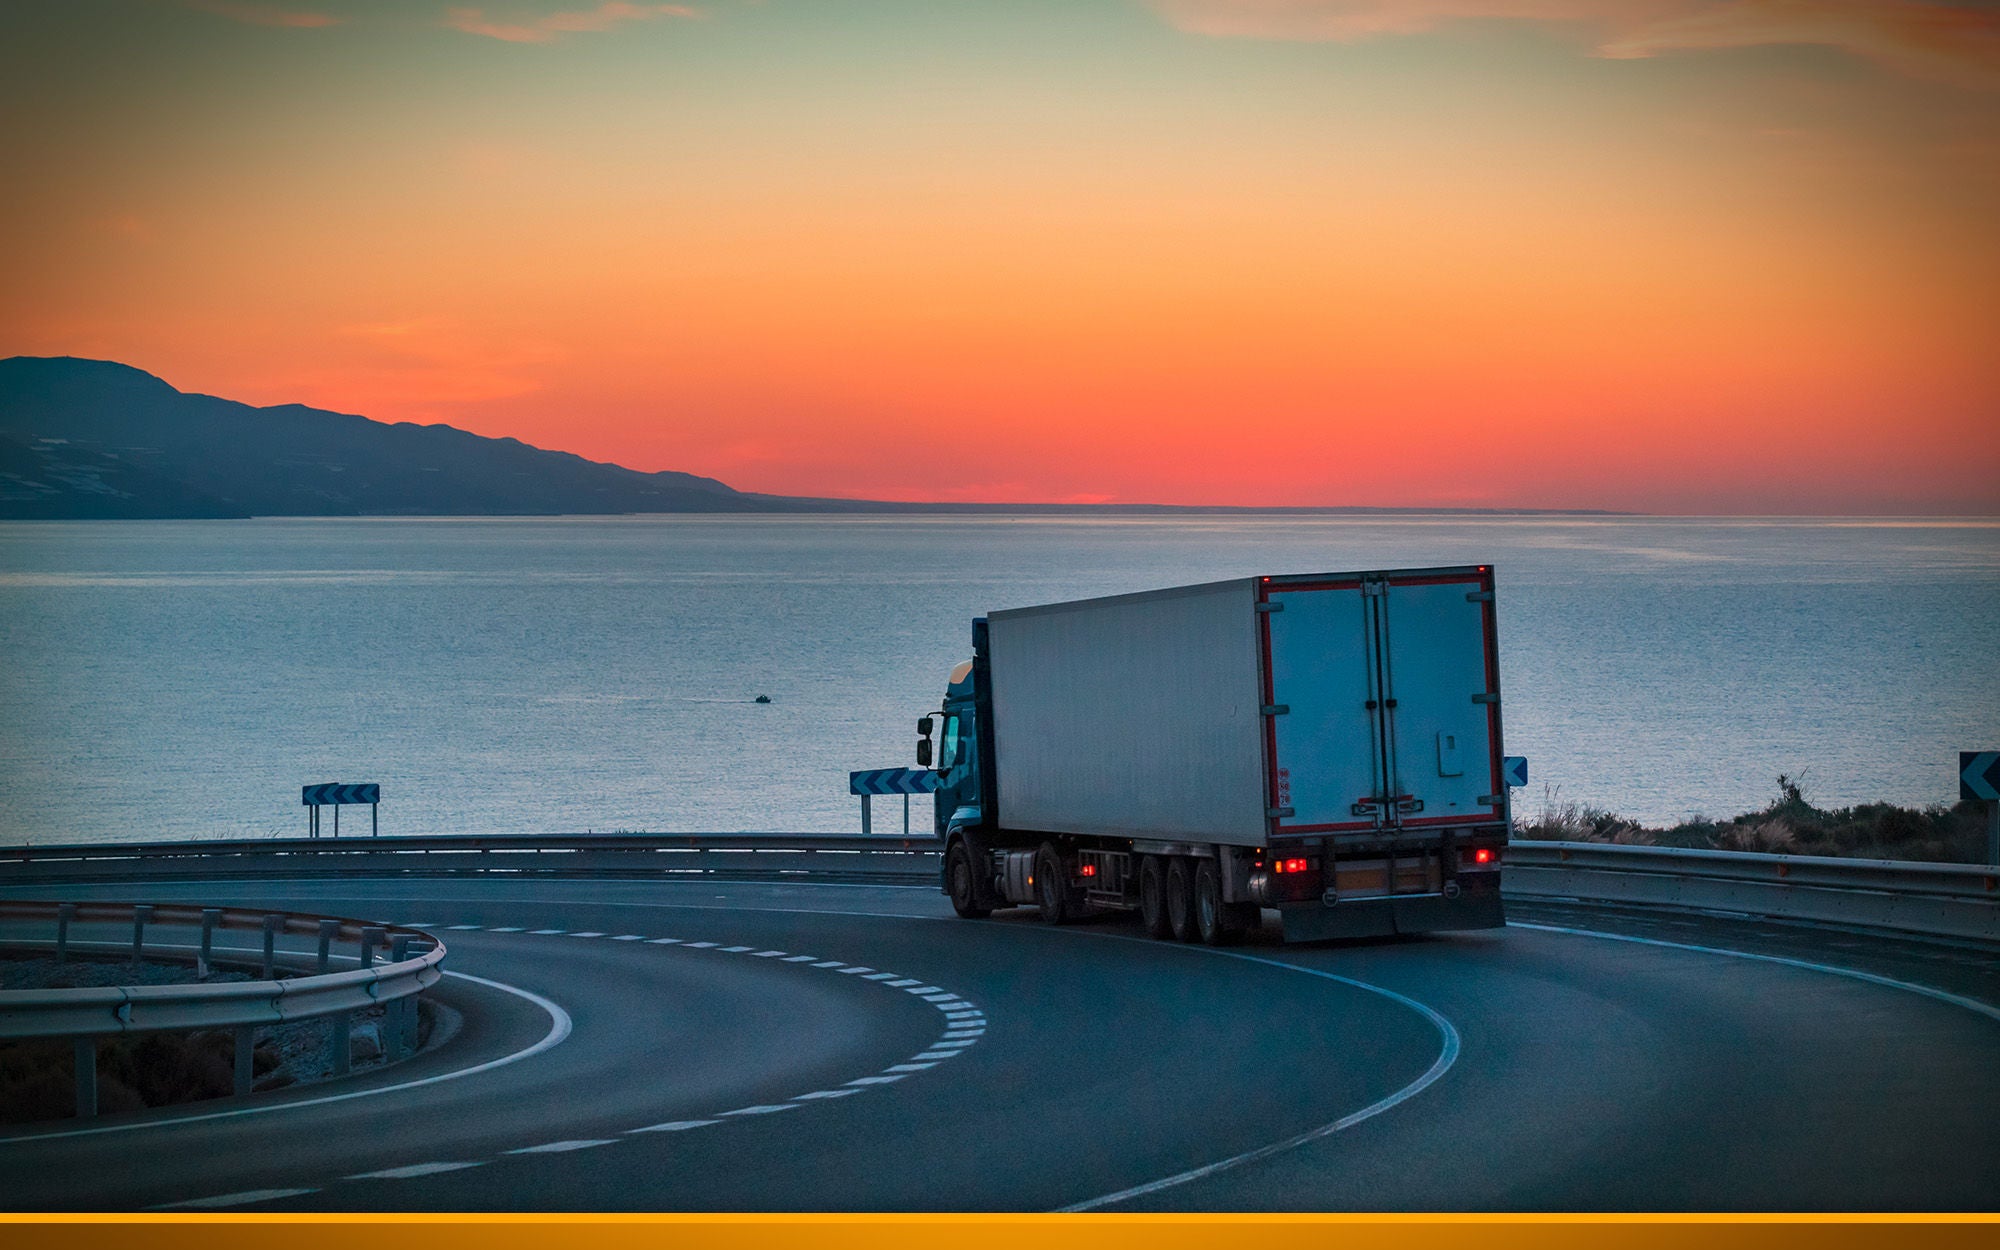 Truck on a mountain road with the sea and sunrise on the horizon.